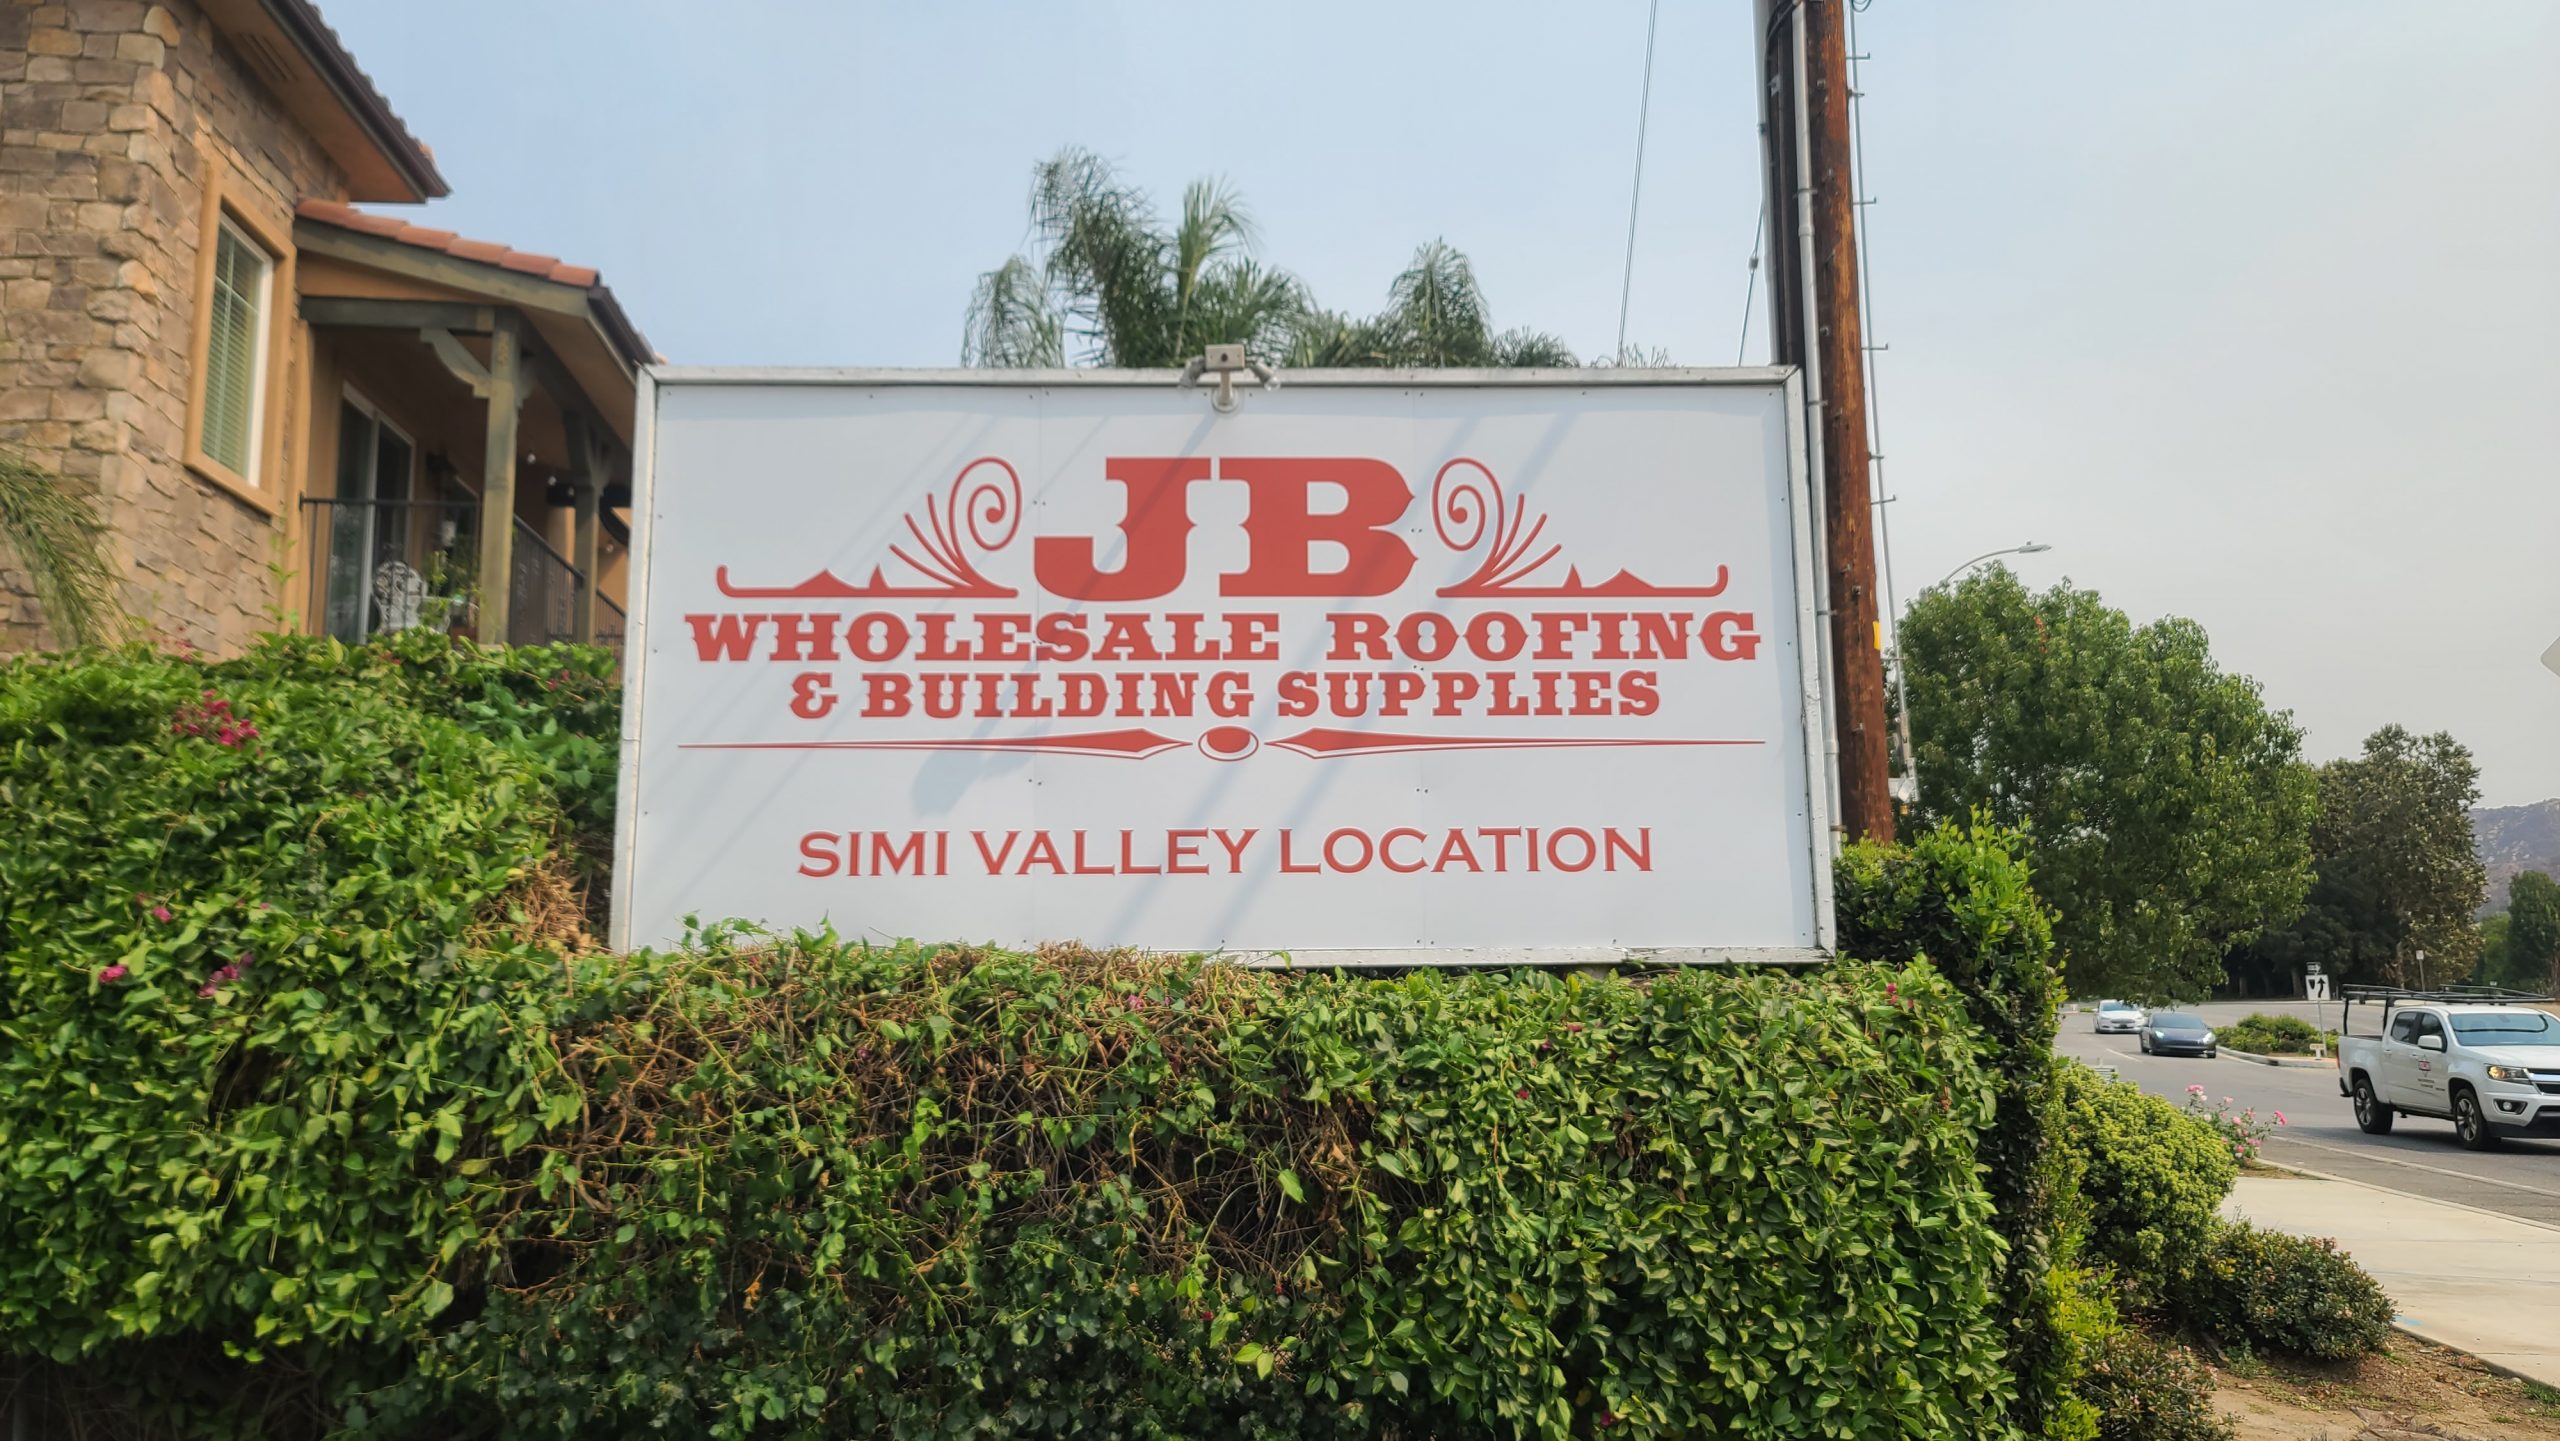 It pays to go big with signage. Like with this billboard sign for JB Wholesale Roofing & Building Supplies' Simi Valley location.